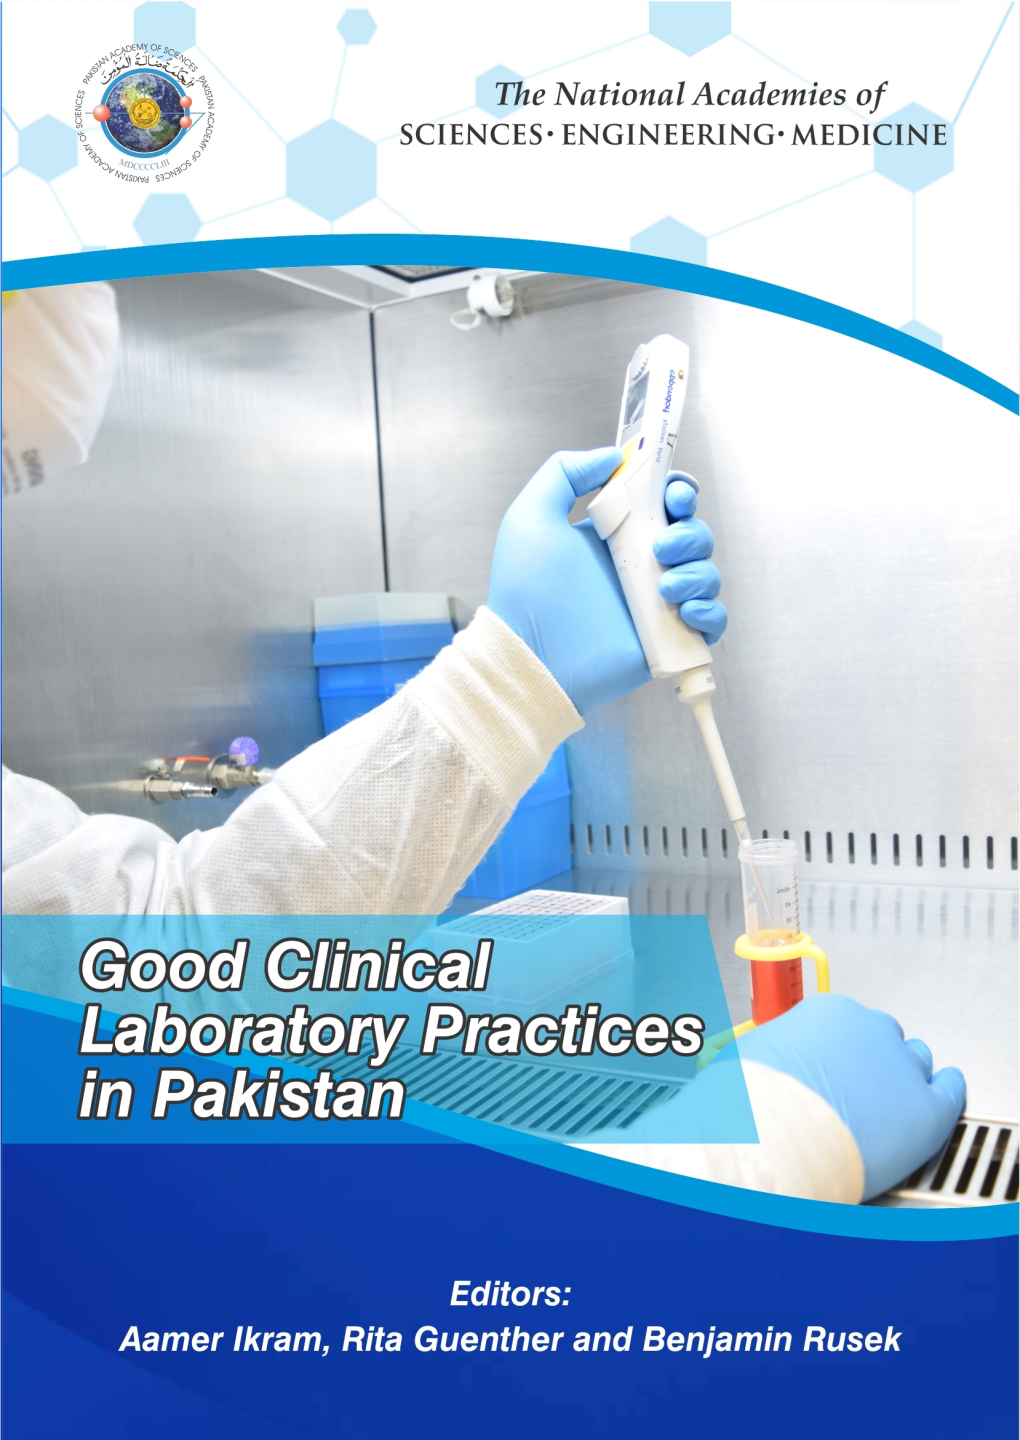 Handbook for Good Clinical Laboratory Practices in Pakistan, Created by the Pakistan Academy of Sciences (PAS) in Collaboration with the U.S